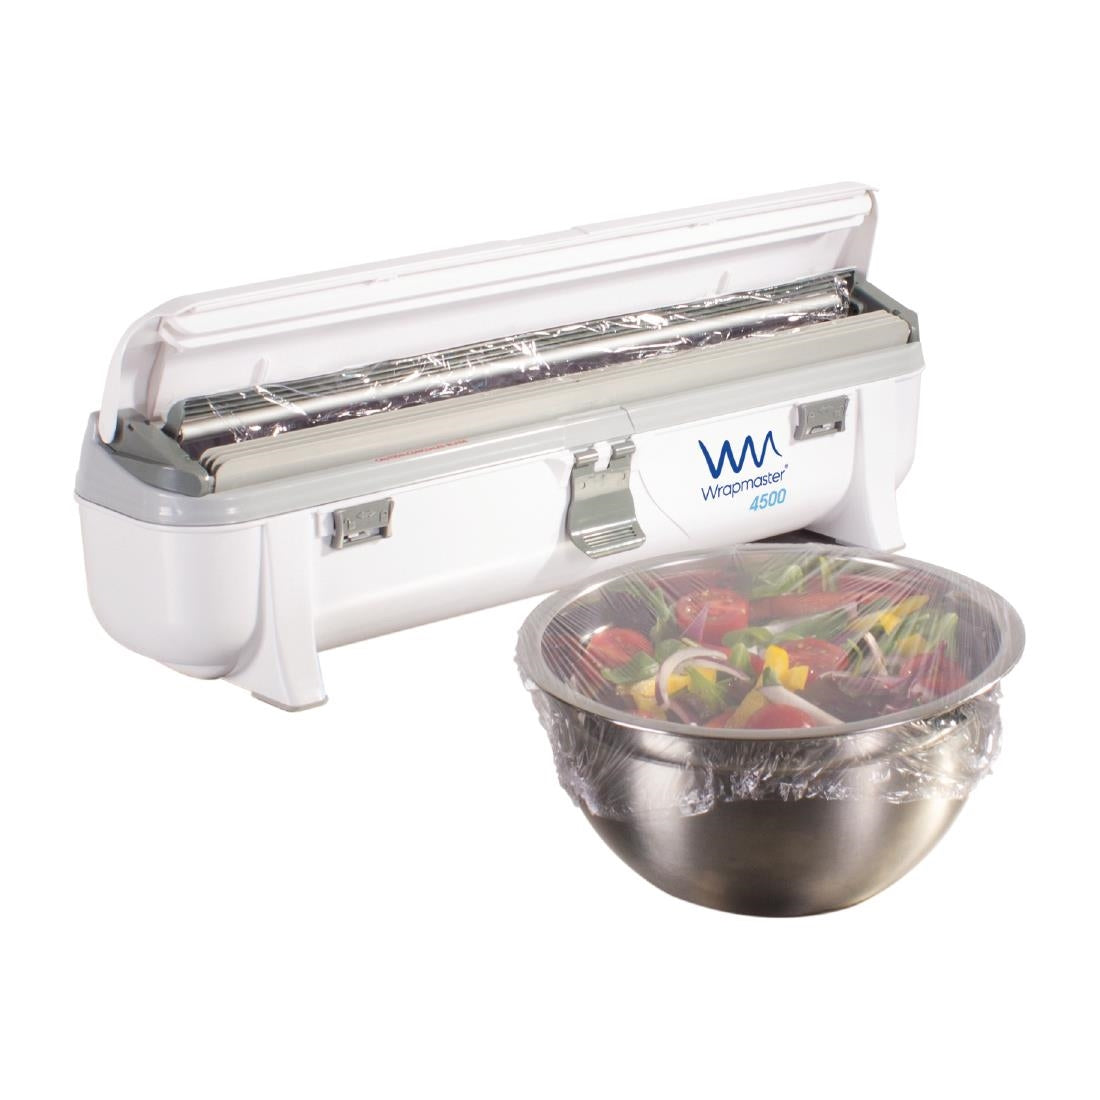 Special Offer Wrapmaster 4500 Dispenser and 3 x 300m Cling Film